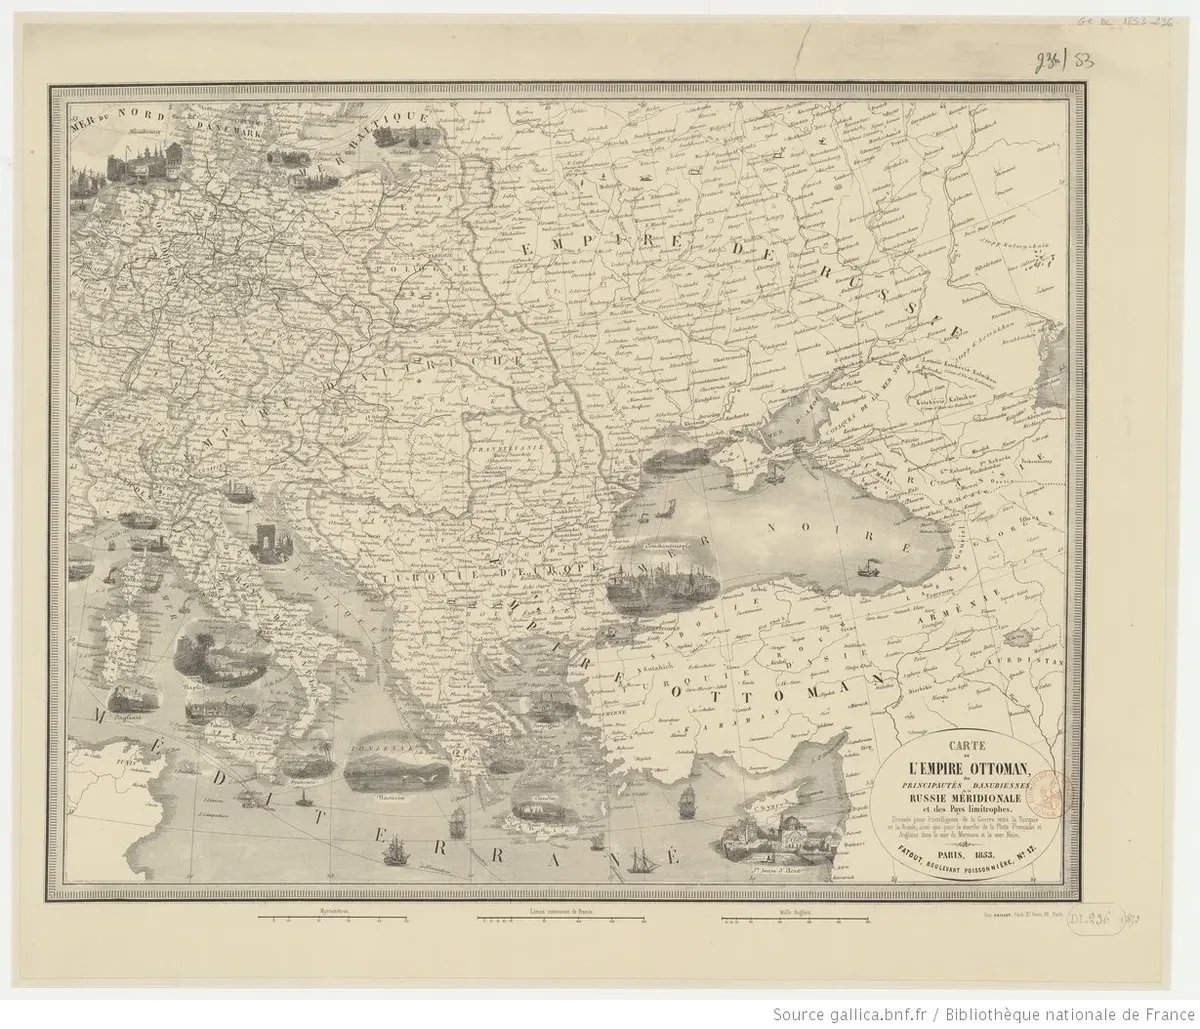 A 19th-century French map focused on Eastern Europe and Asia Minor. Source: gallica.bnf.fr